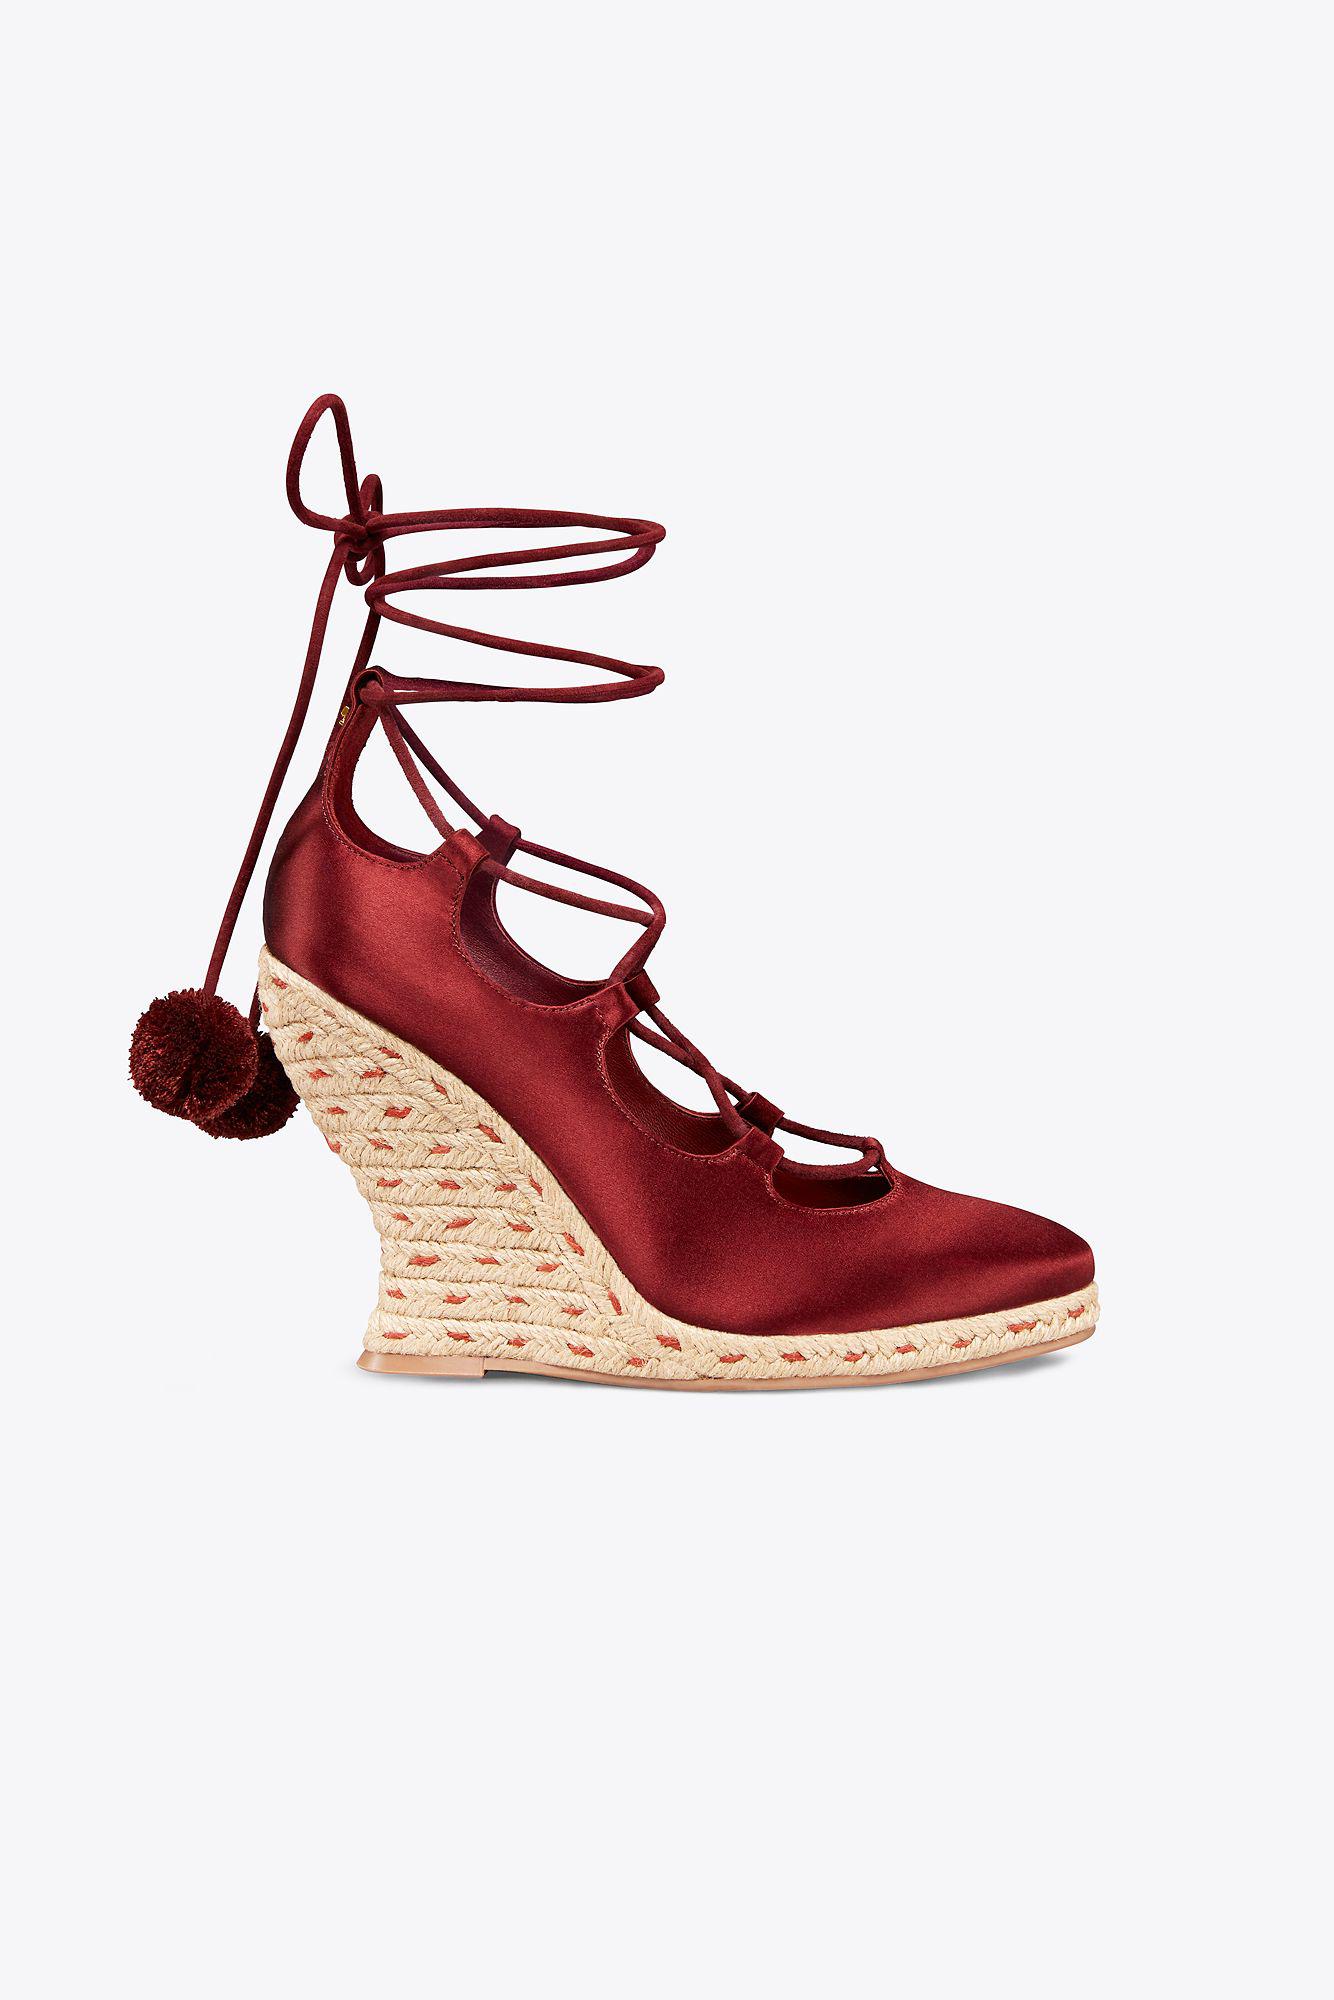 Tory Burch Pompom-embellished Lace-up Satin Wedge Espadrilles Merlot in Red  | Lyst